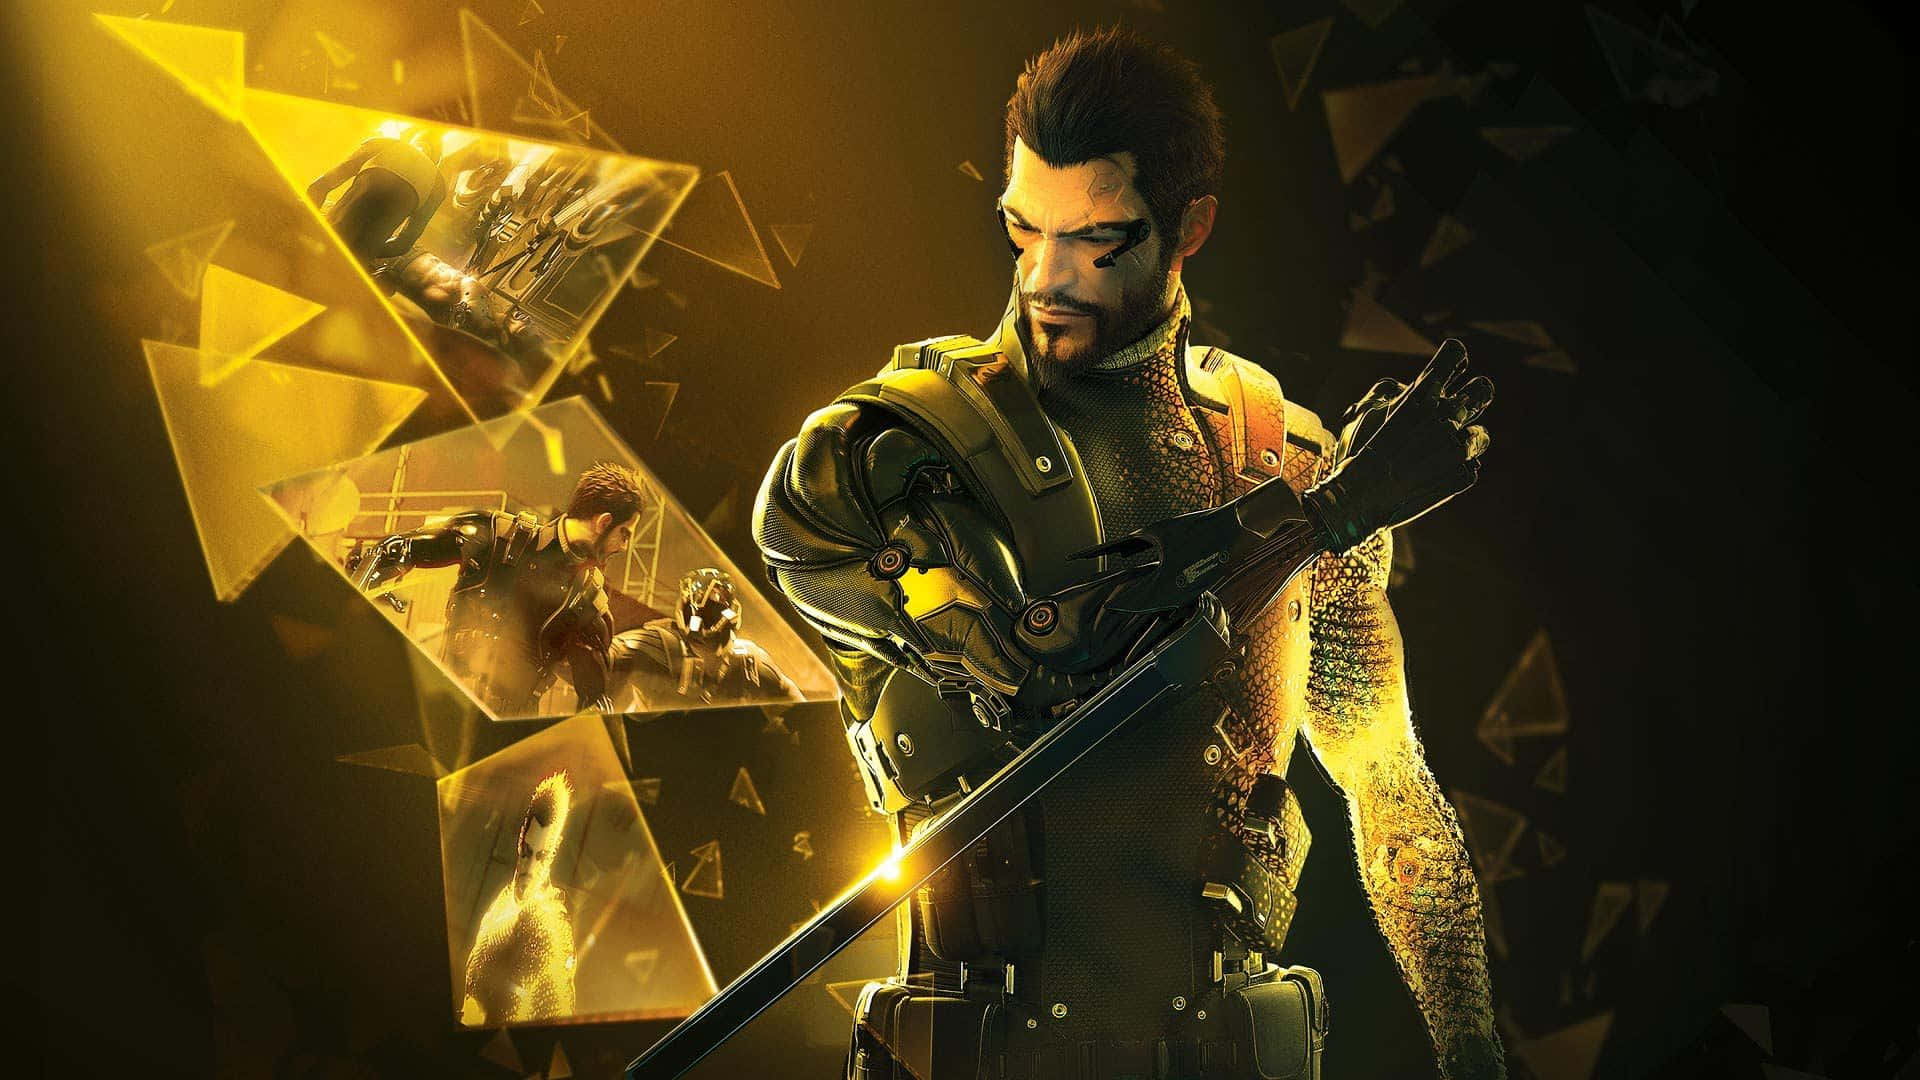 Ready to face the battle in Mankind Divided Wallpaper